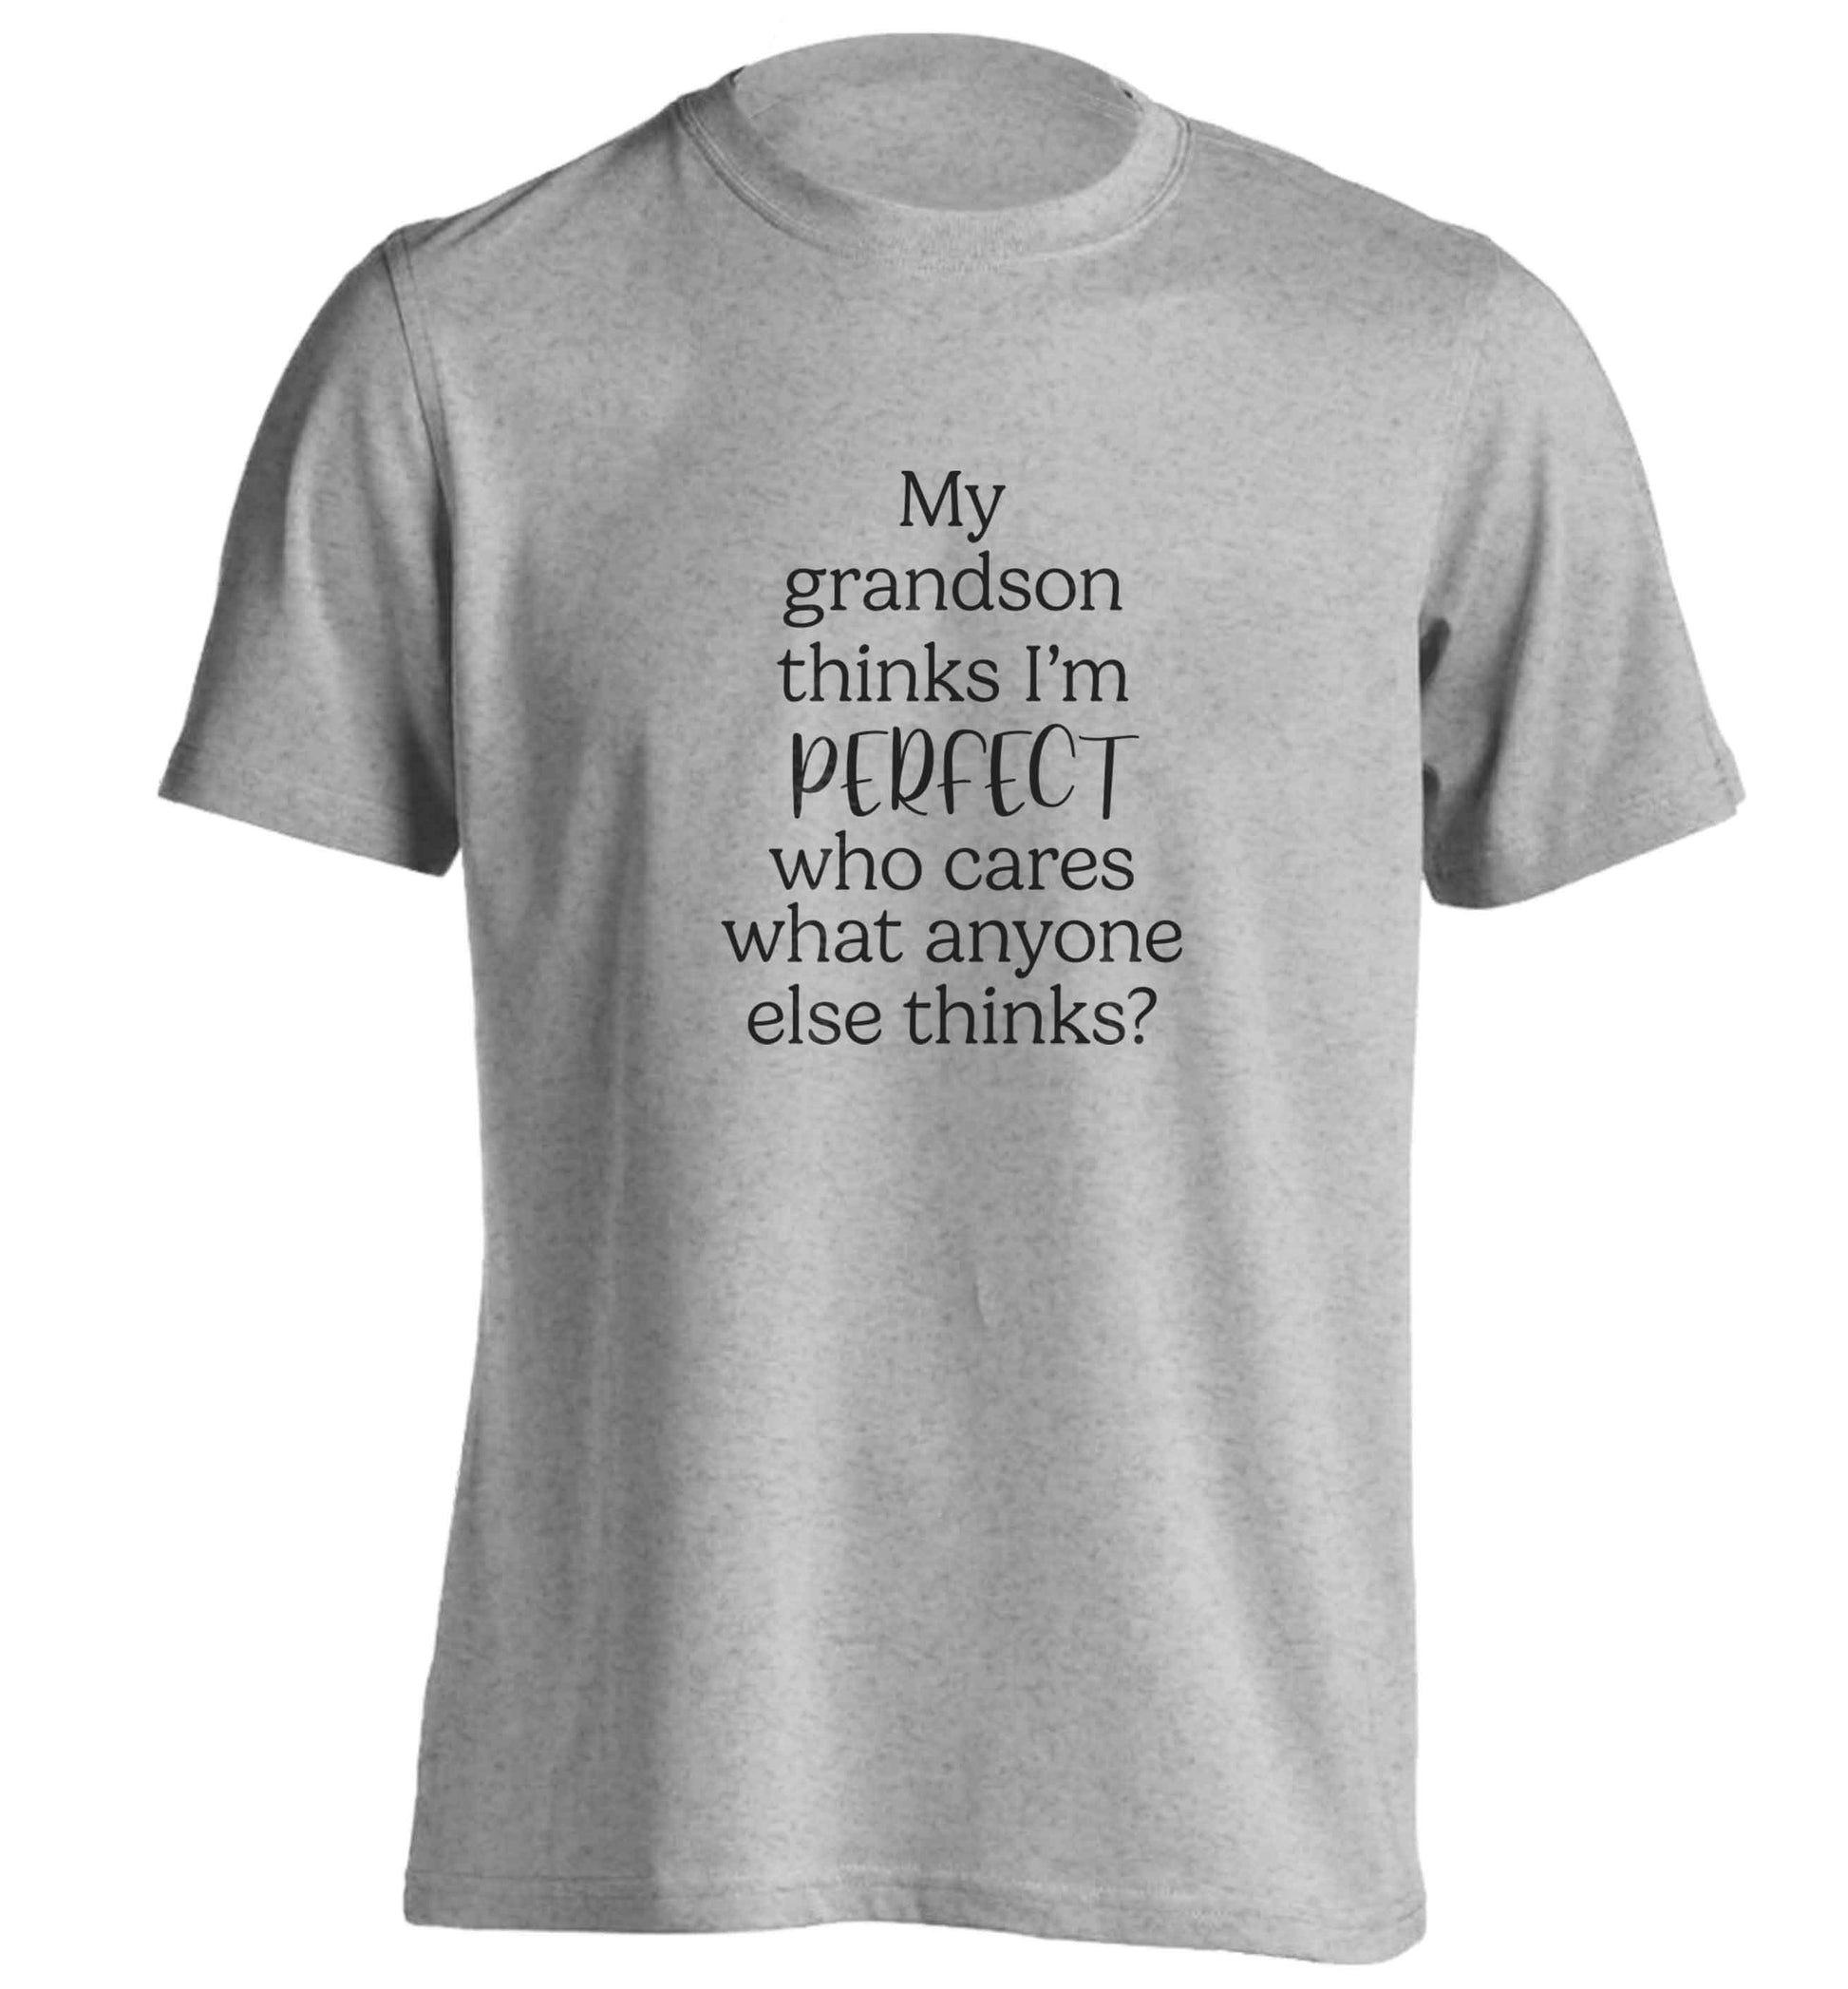 My Grandson thinks I'm perfect who cares what anyone else thinks? adults unisex grey Tshirt 2XL